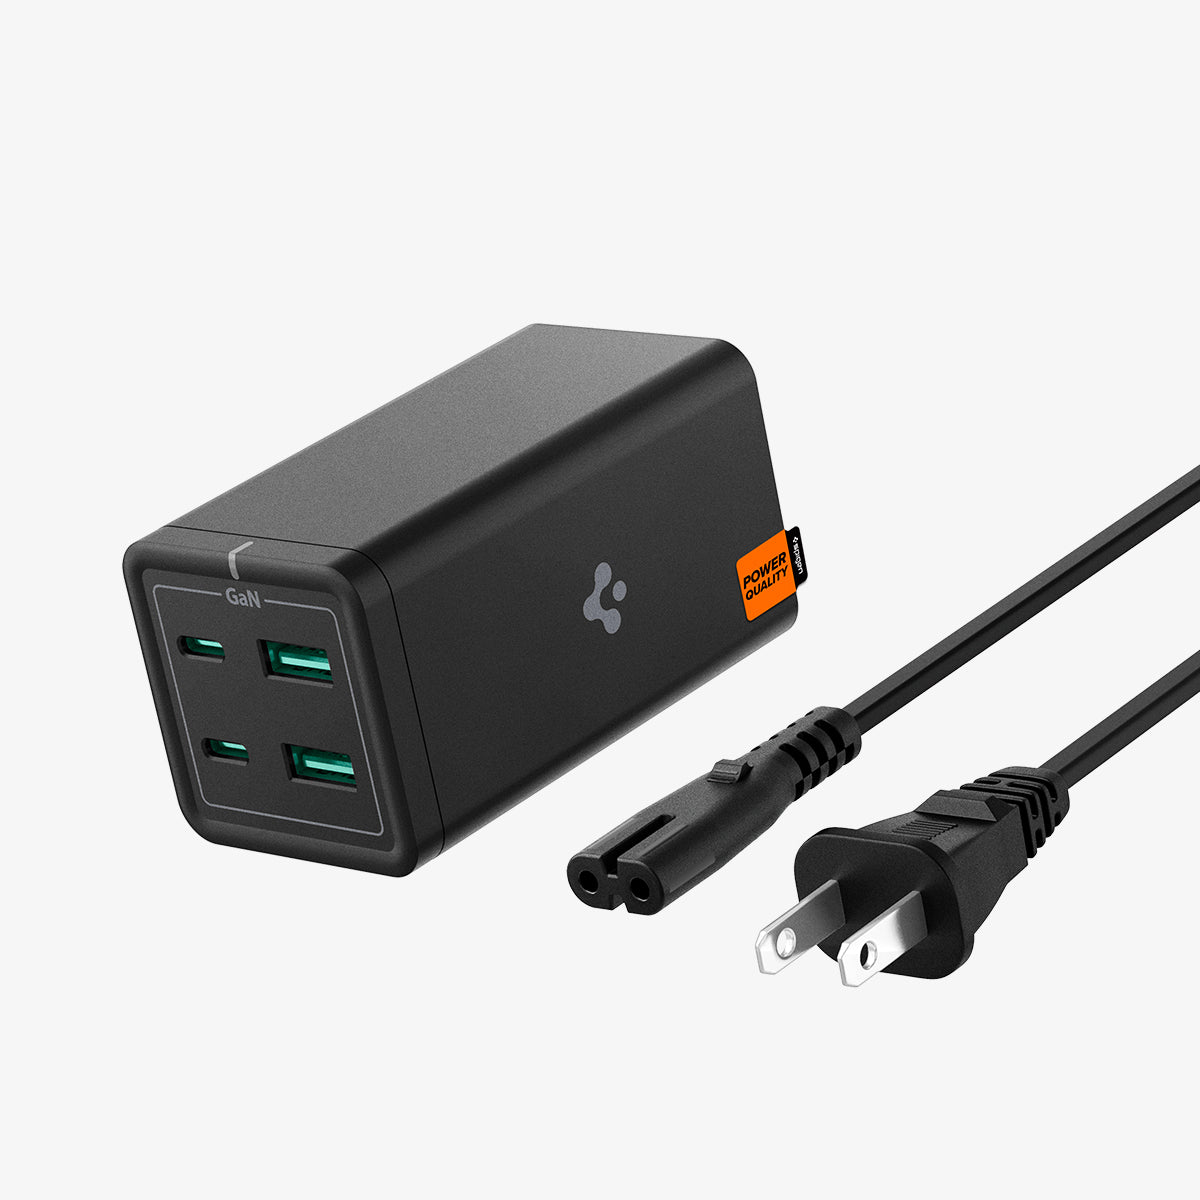 ACH03786 - Spigen ArcDock 120W Desktop Charger PD2100 in black showing the front and side with power cable next to it